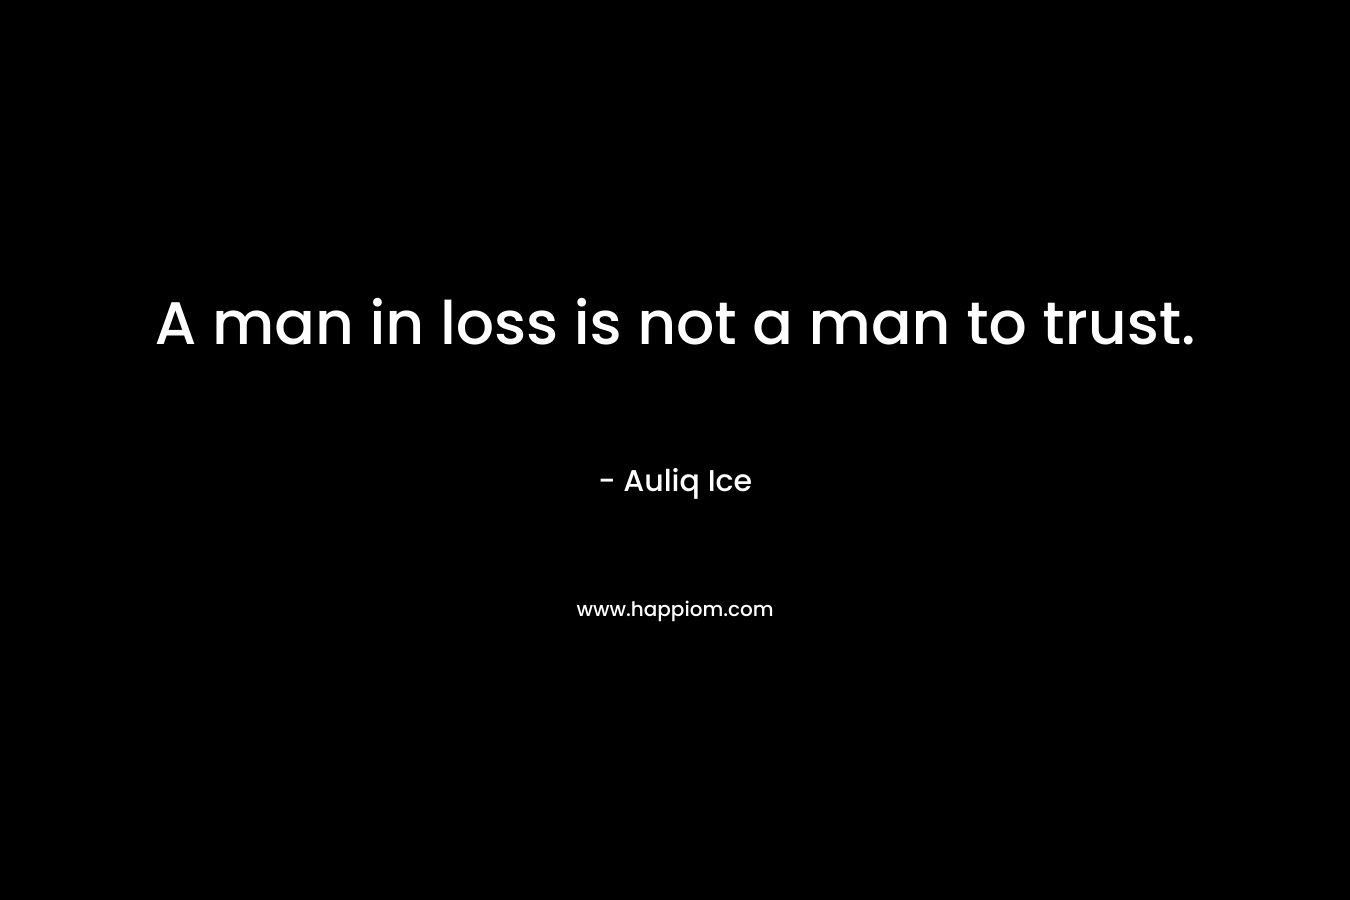 A man in loss is not a man to trust. – Auliq Ice